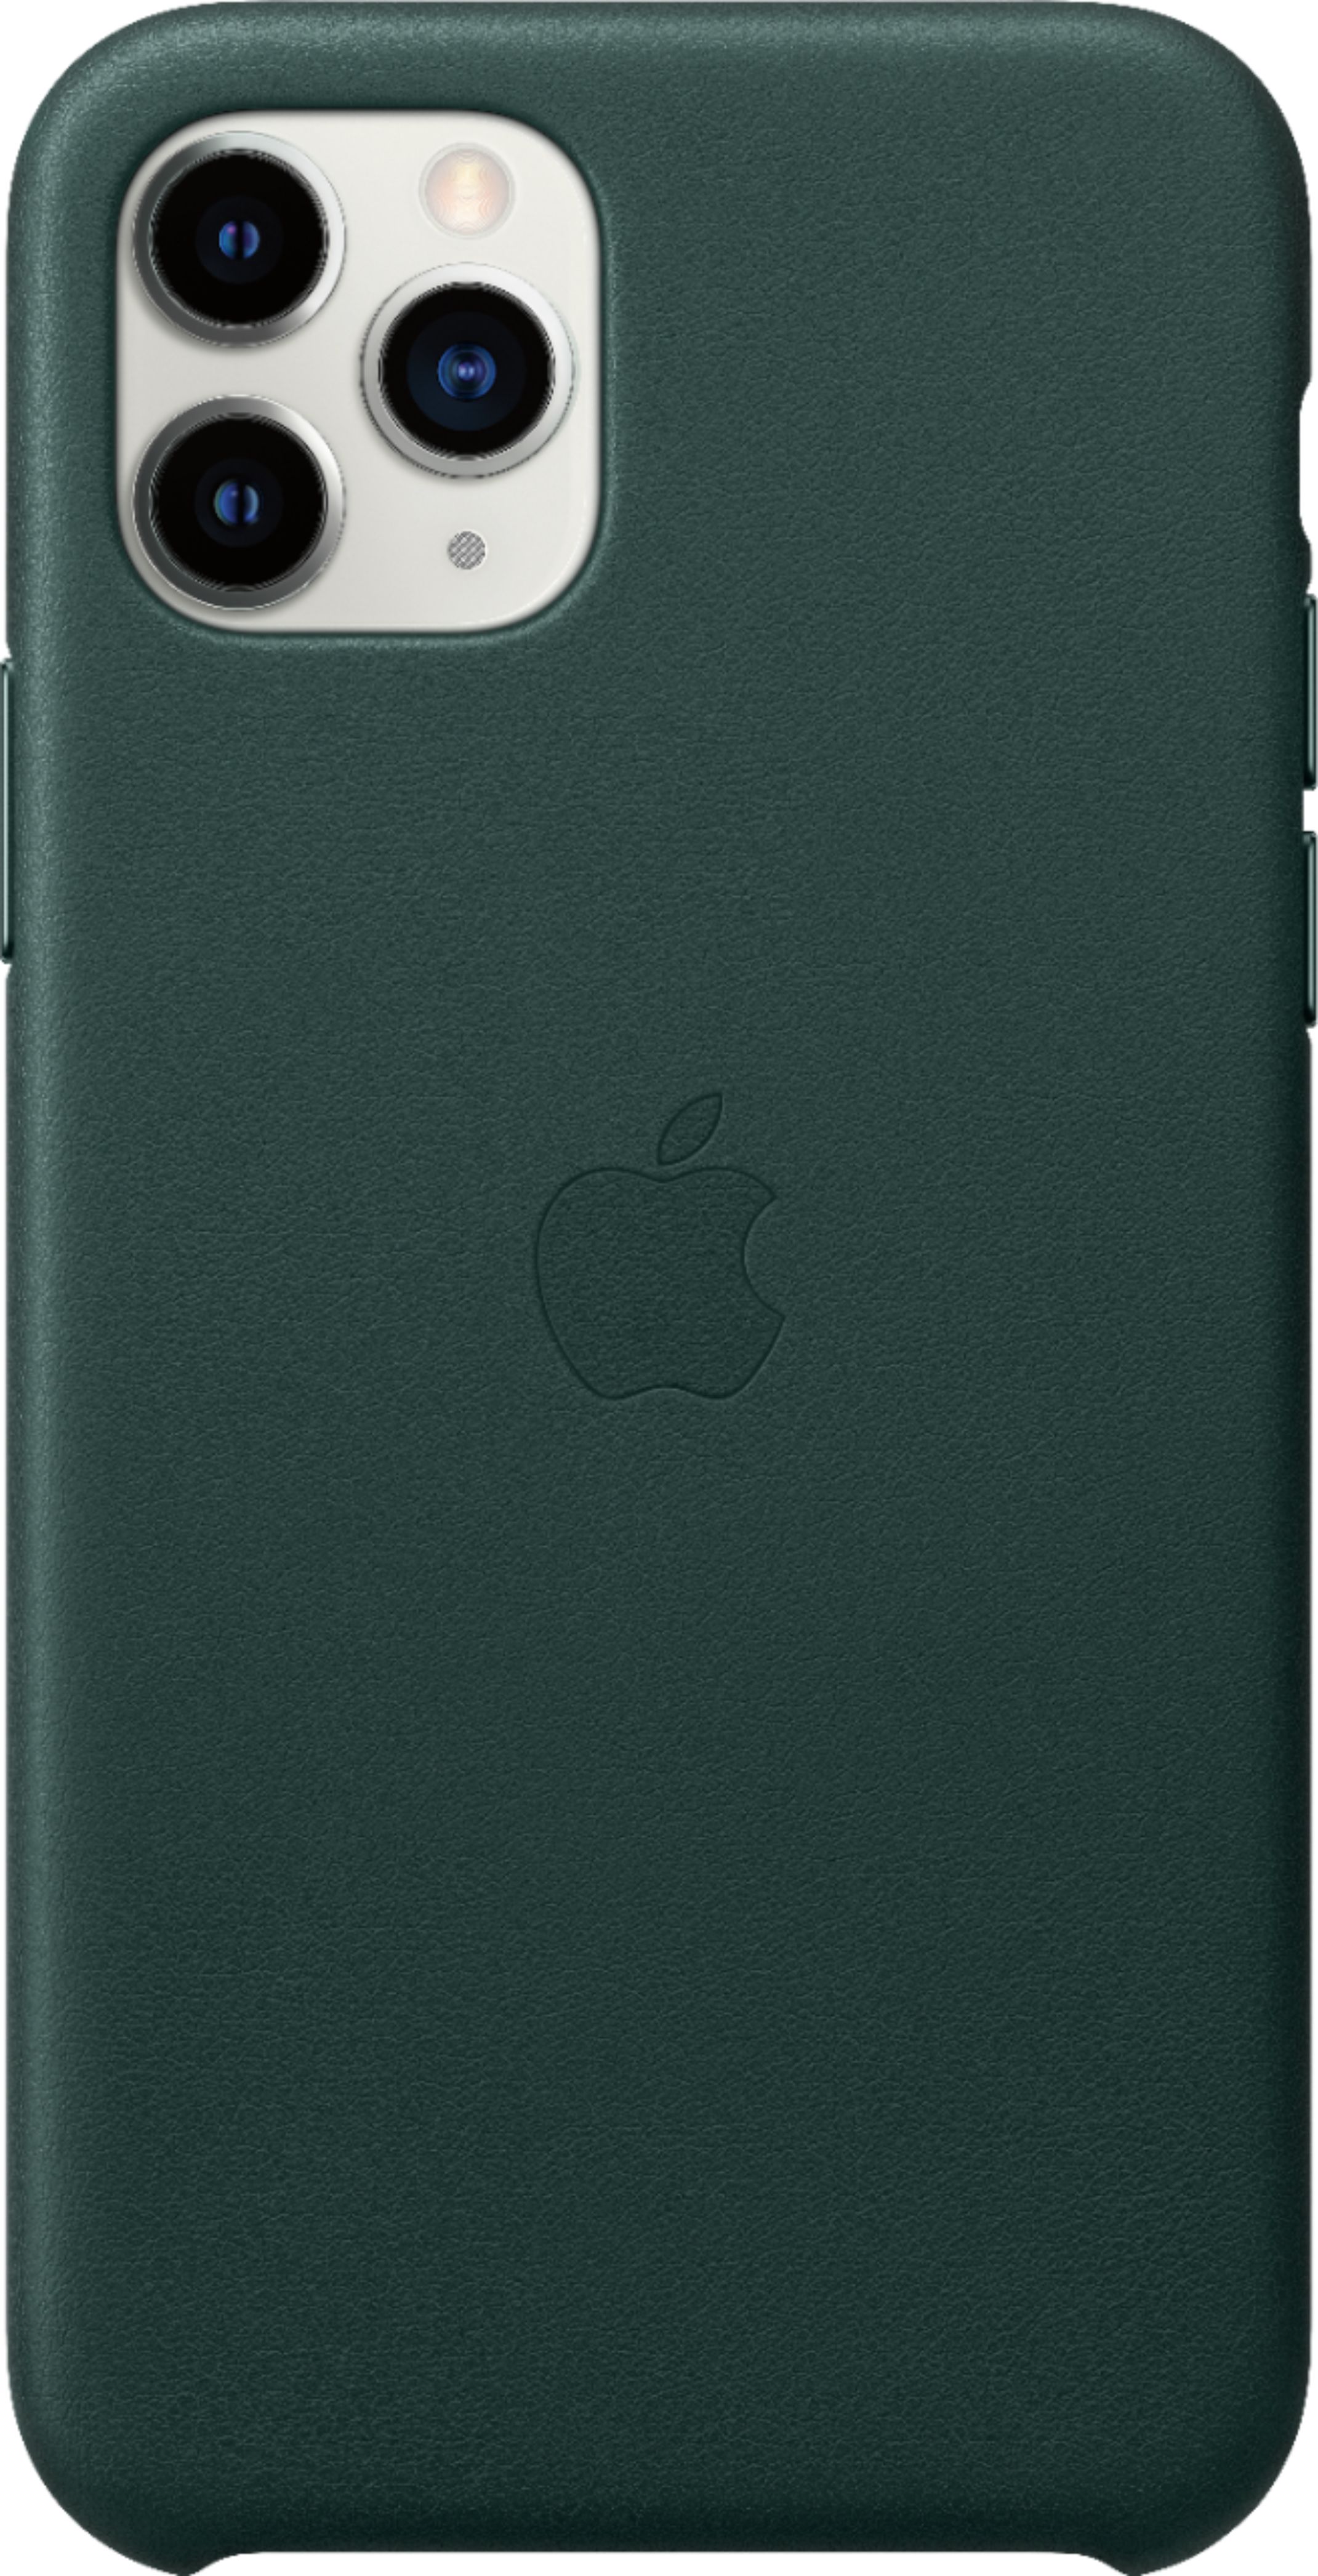 Apple iPhone 11 Pro Leather Case Forest Green MWYC2ZM/A - Best Buy